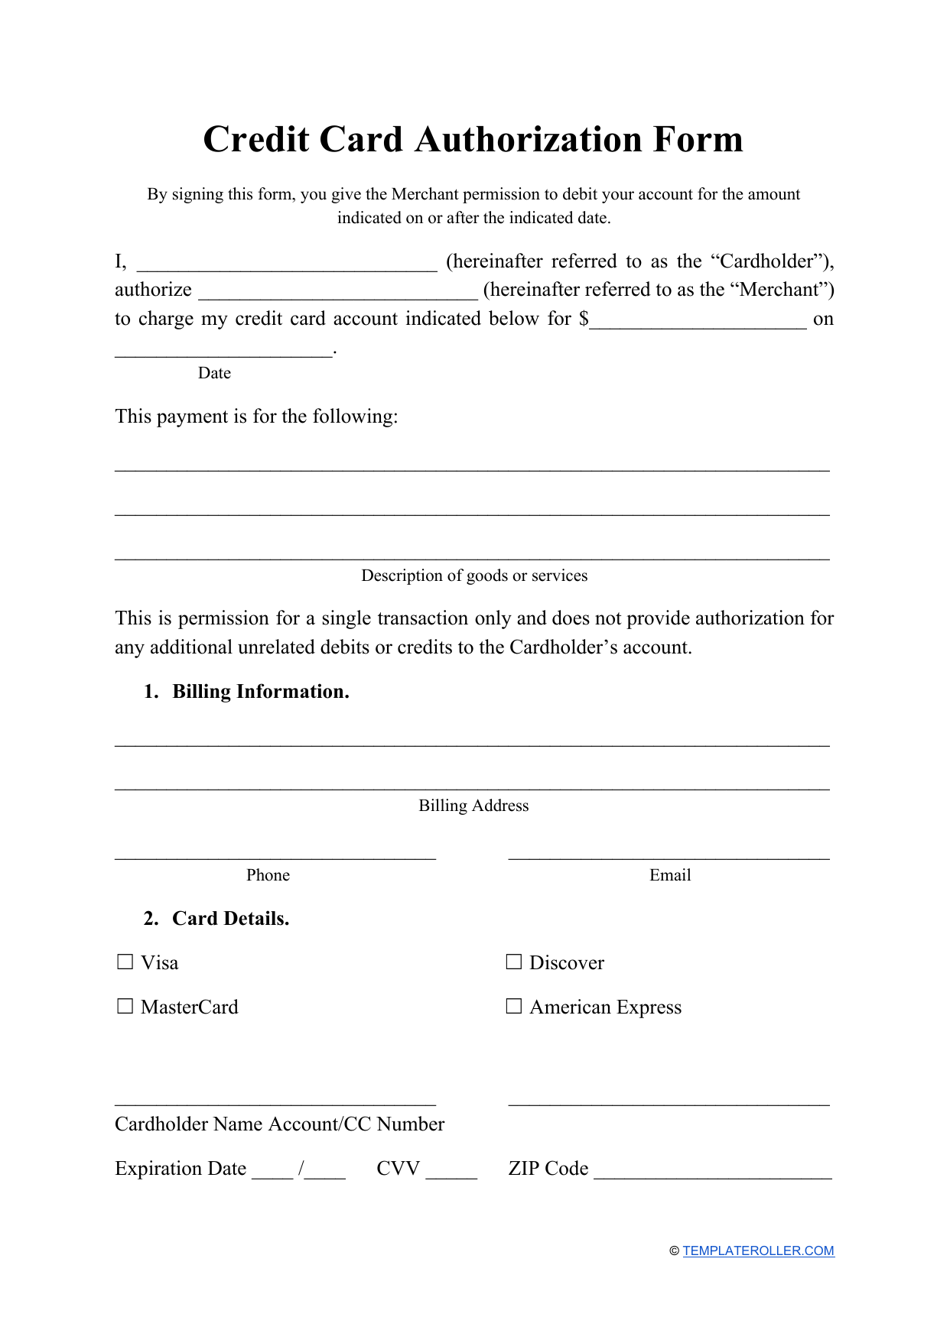 Credit Card Authorization Form Download Printable PDF  Templateroller Throughout Authorization To Charge Credit Card Template